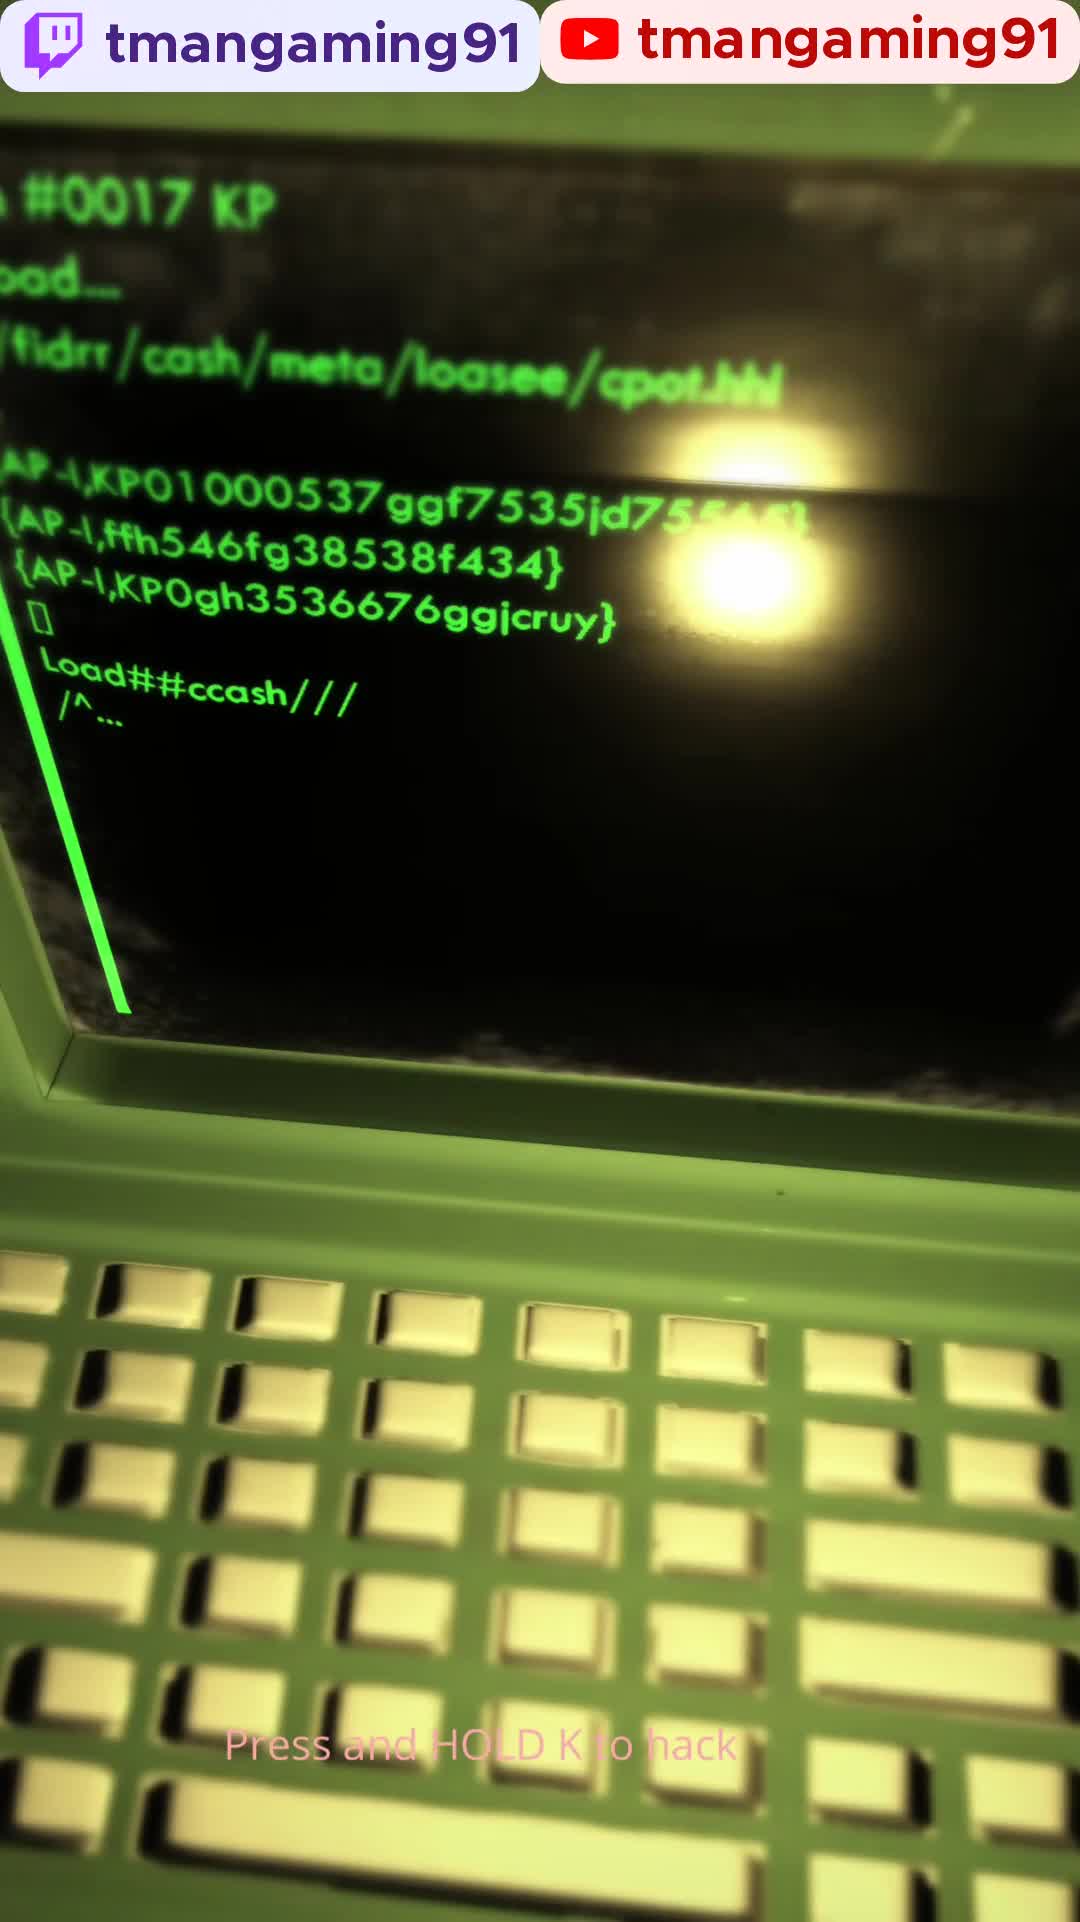 Hacking Computers